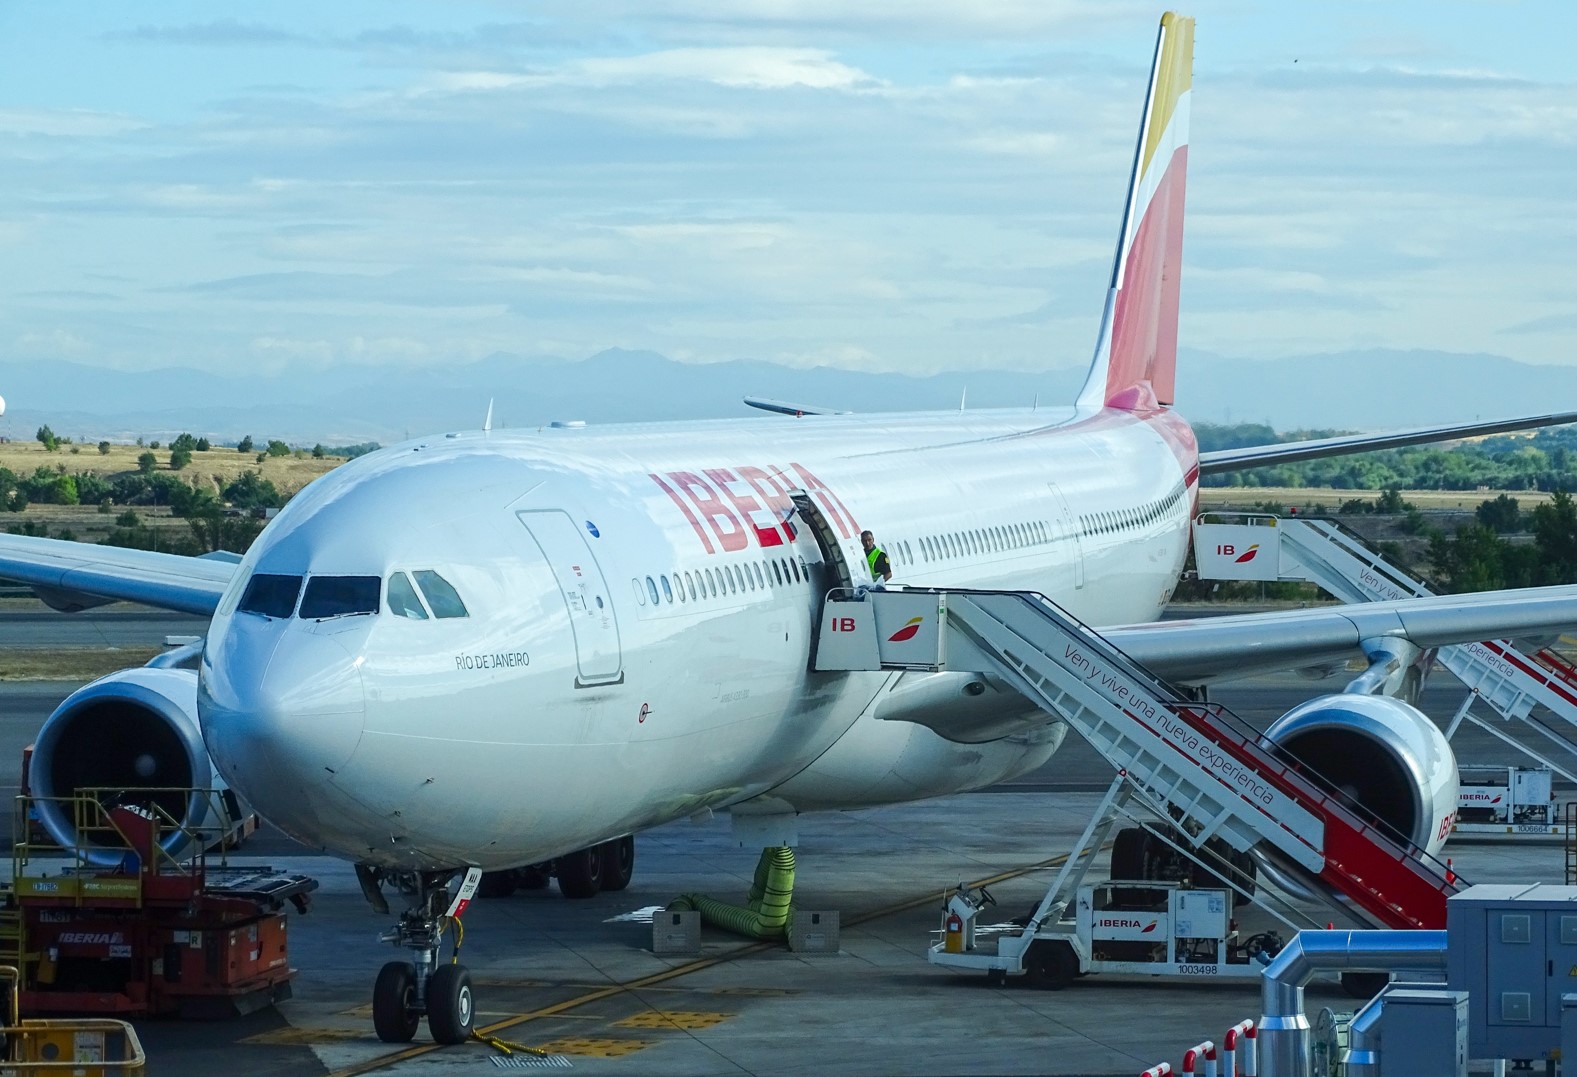 Iberia's airplane at the airport